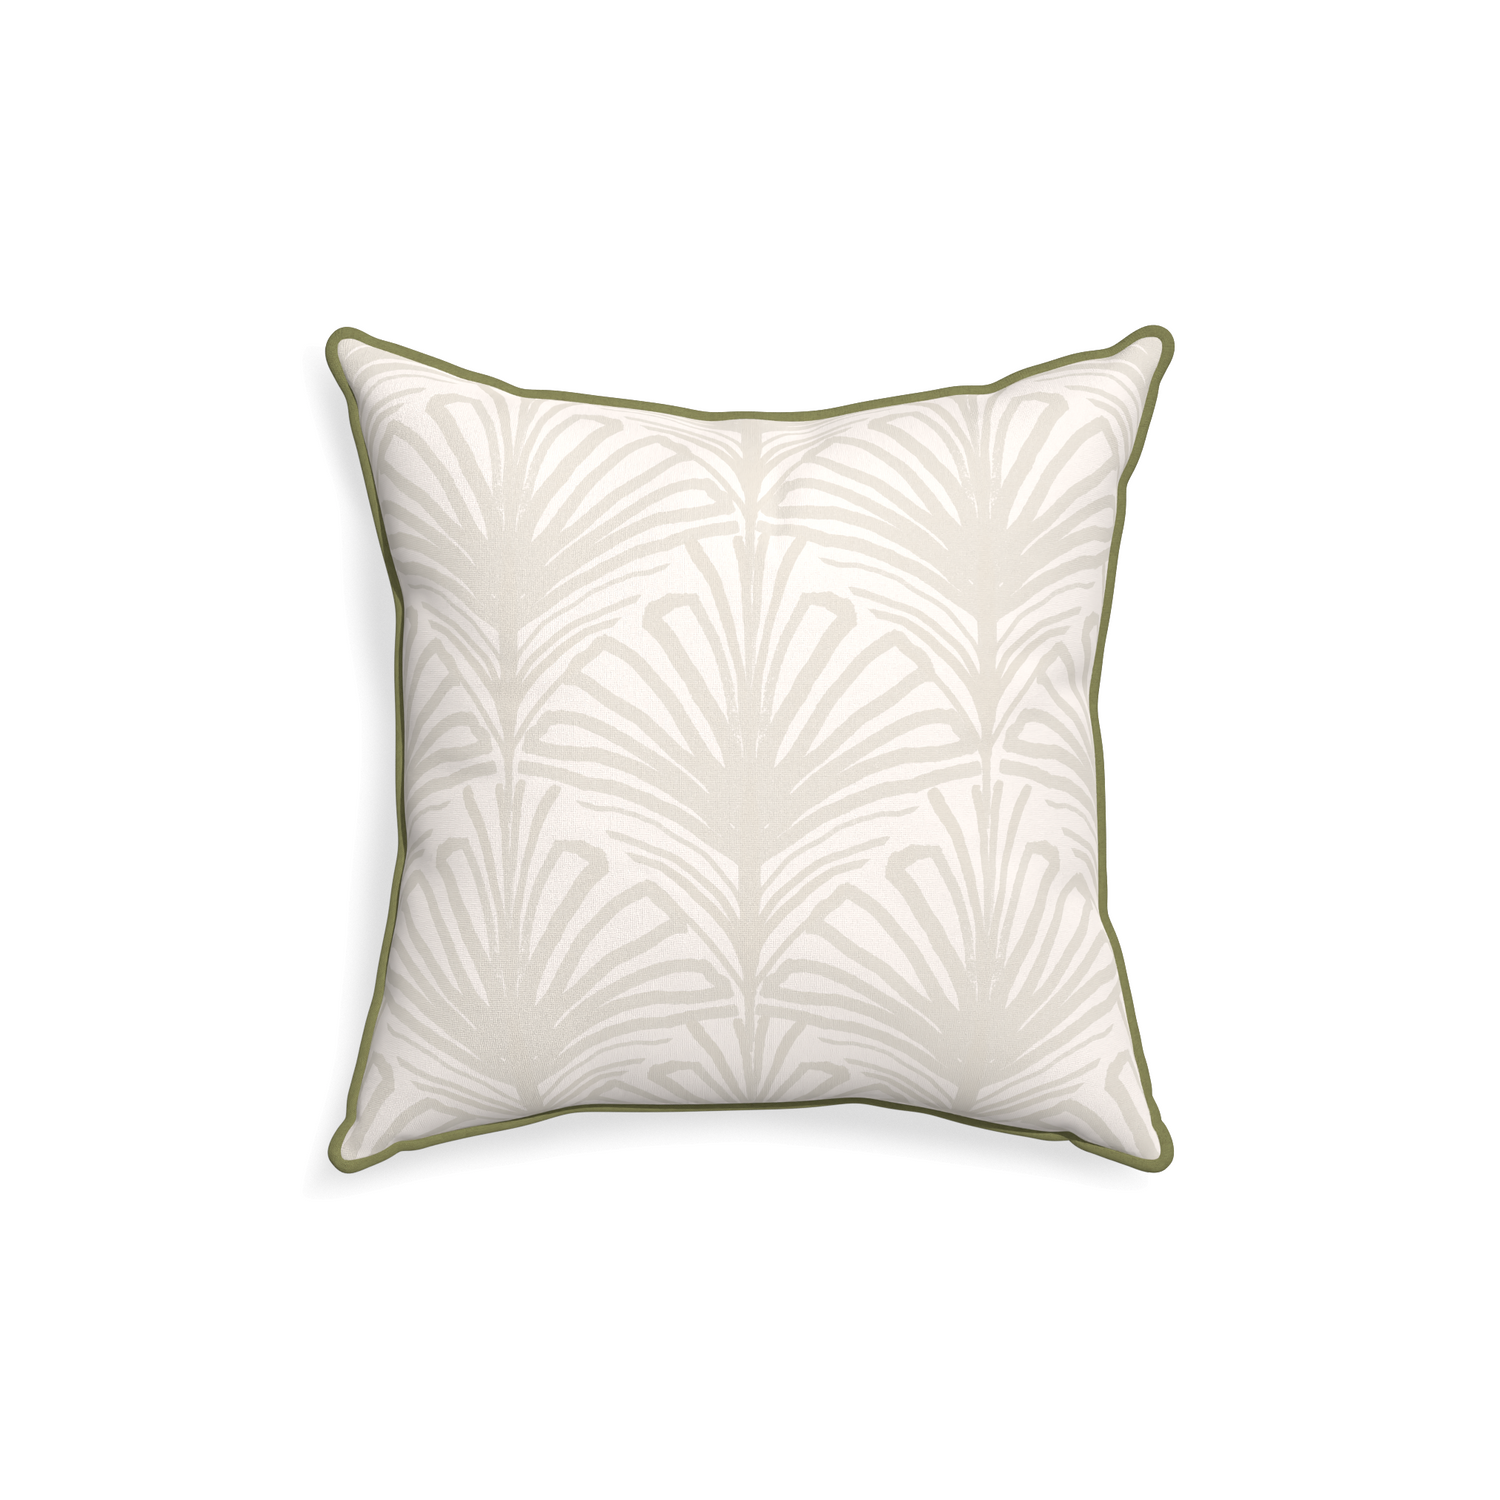 18-square suzy sand custom pillow with moss piping on white background